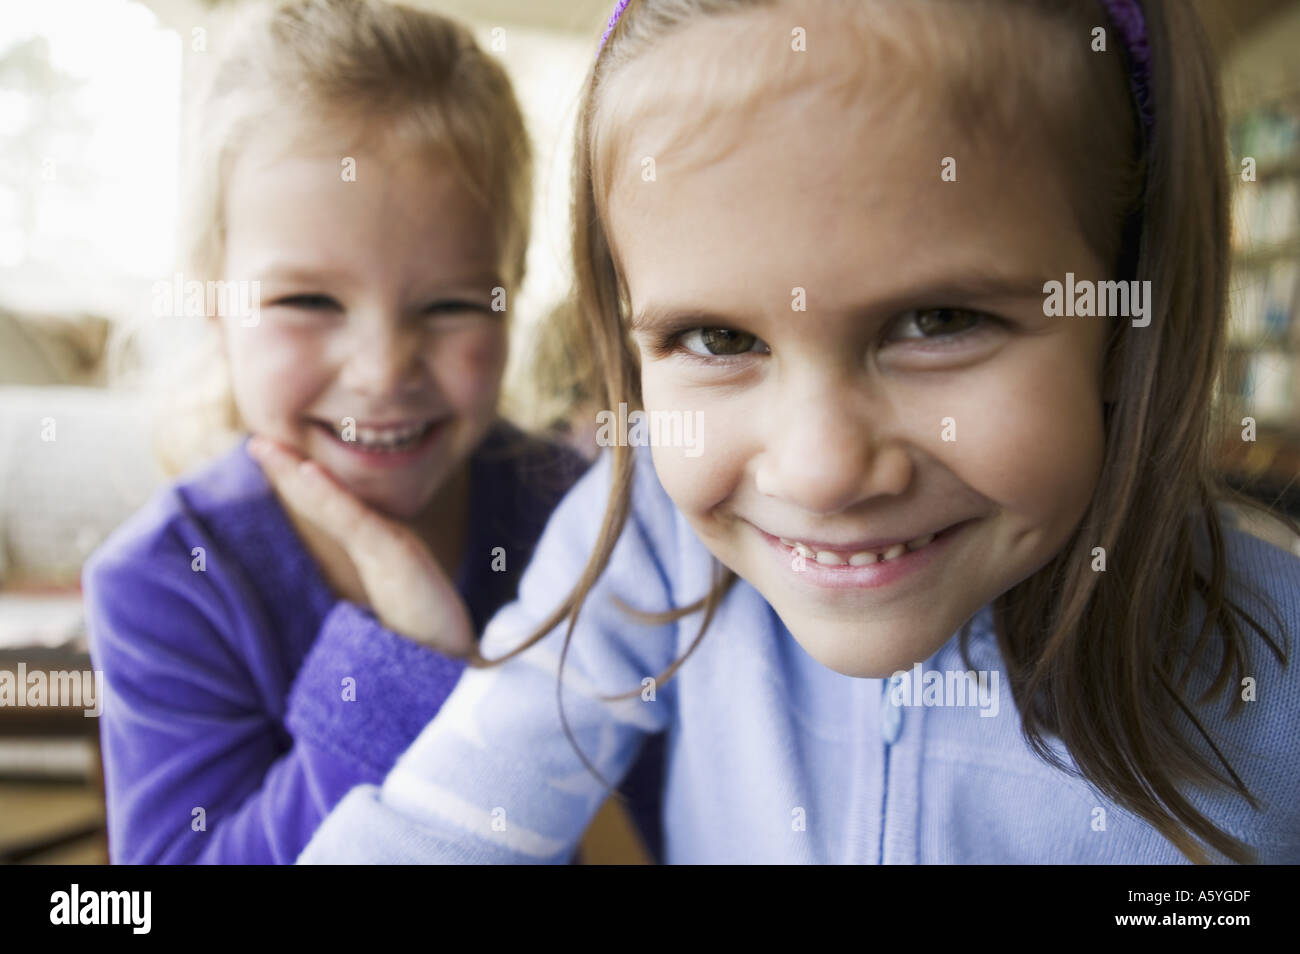 Girls laughing together Stock Photo